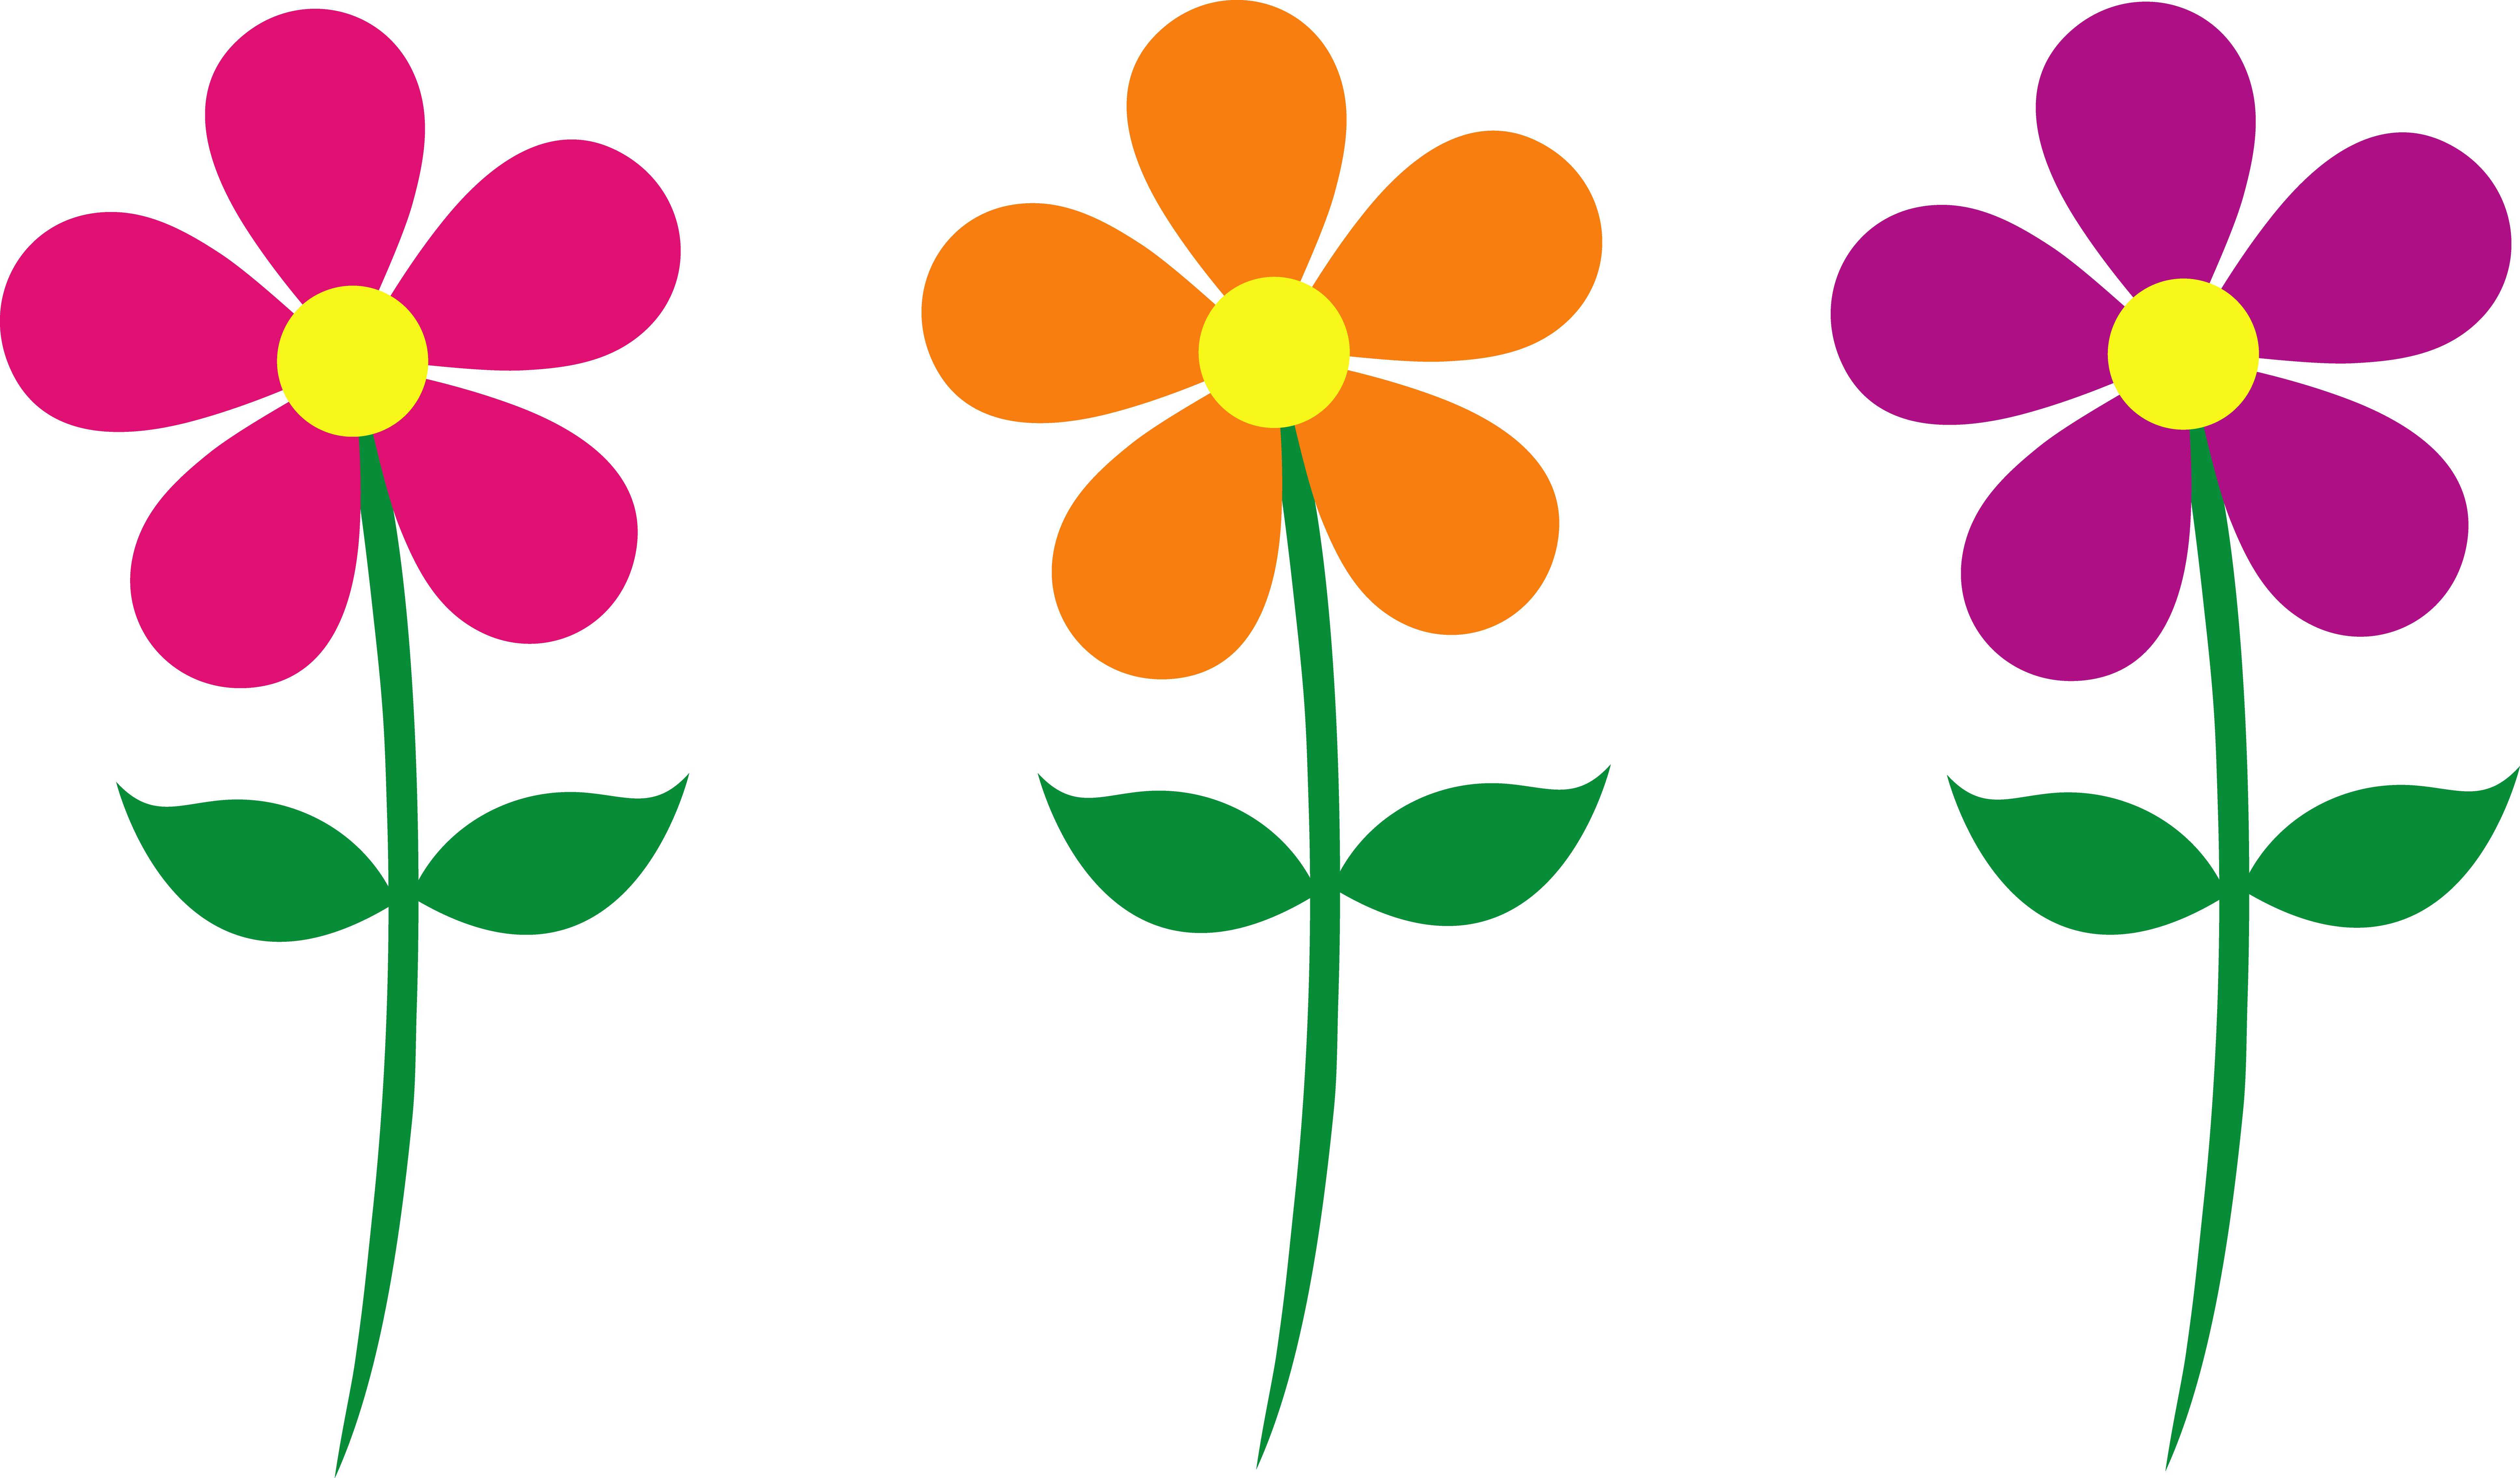 Spring Flowers Clip Art Free - ClipArt Best